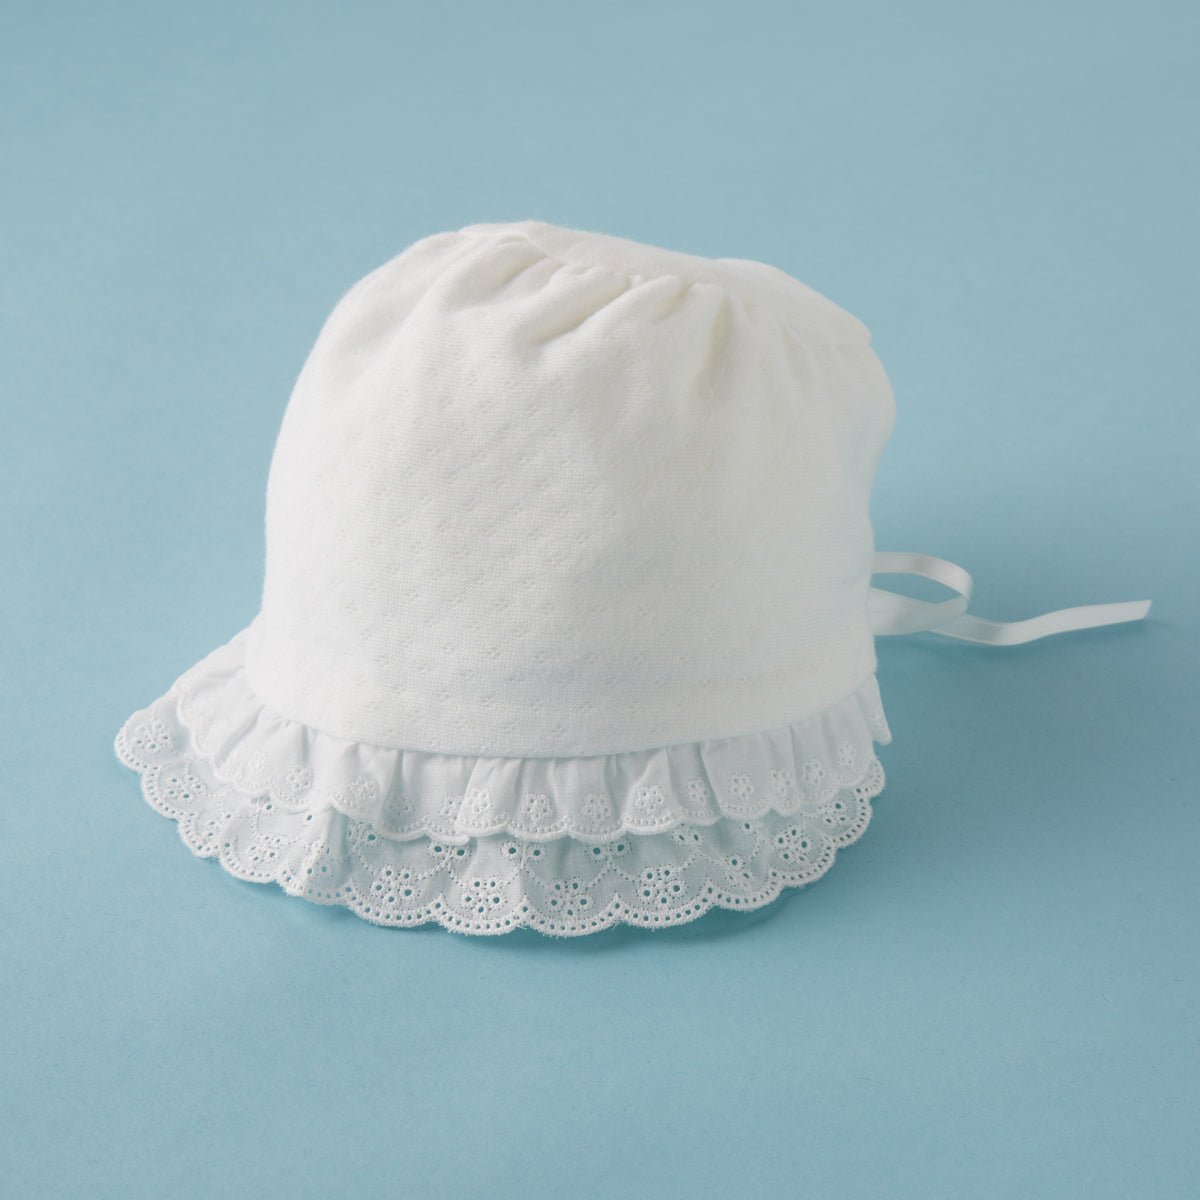 Ceremony collection - Lace Embellished Baby Bonnet - MIKI HOUSE USA